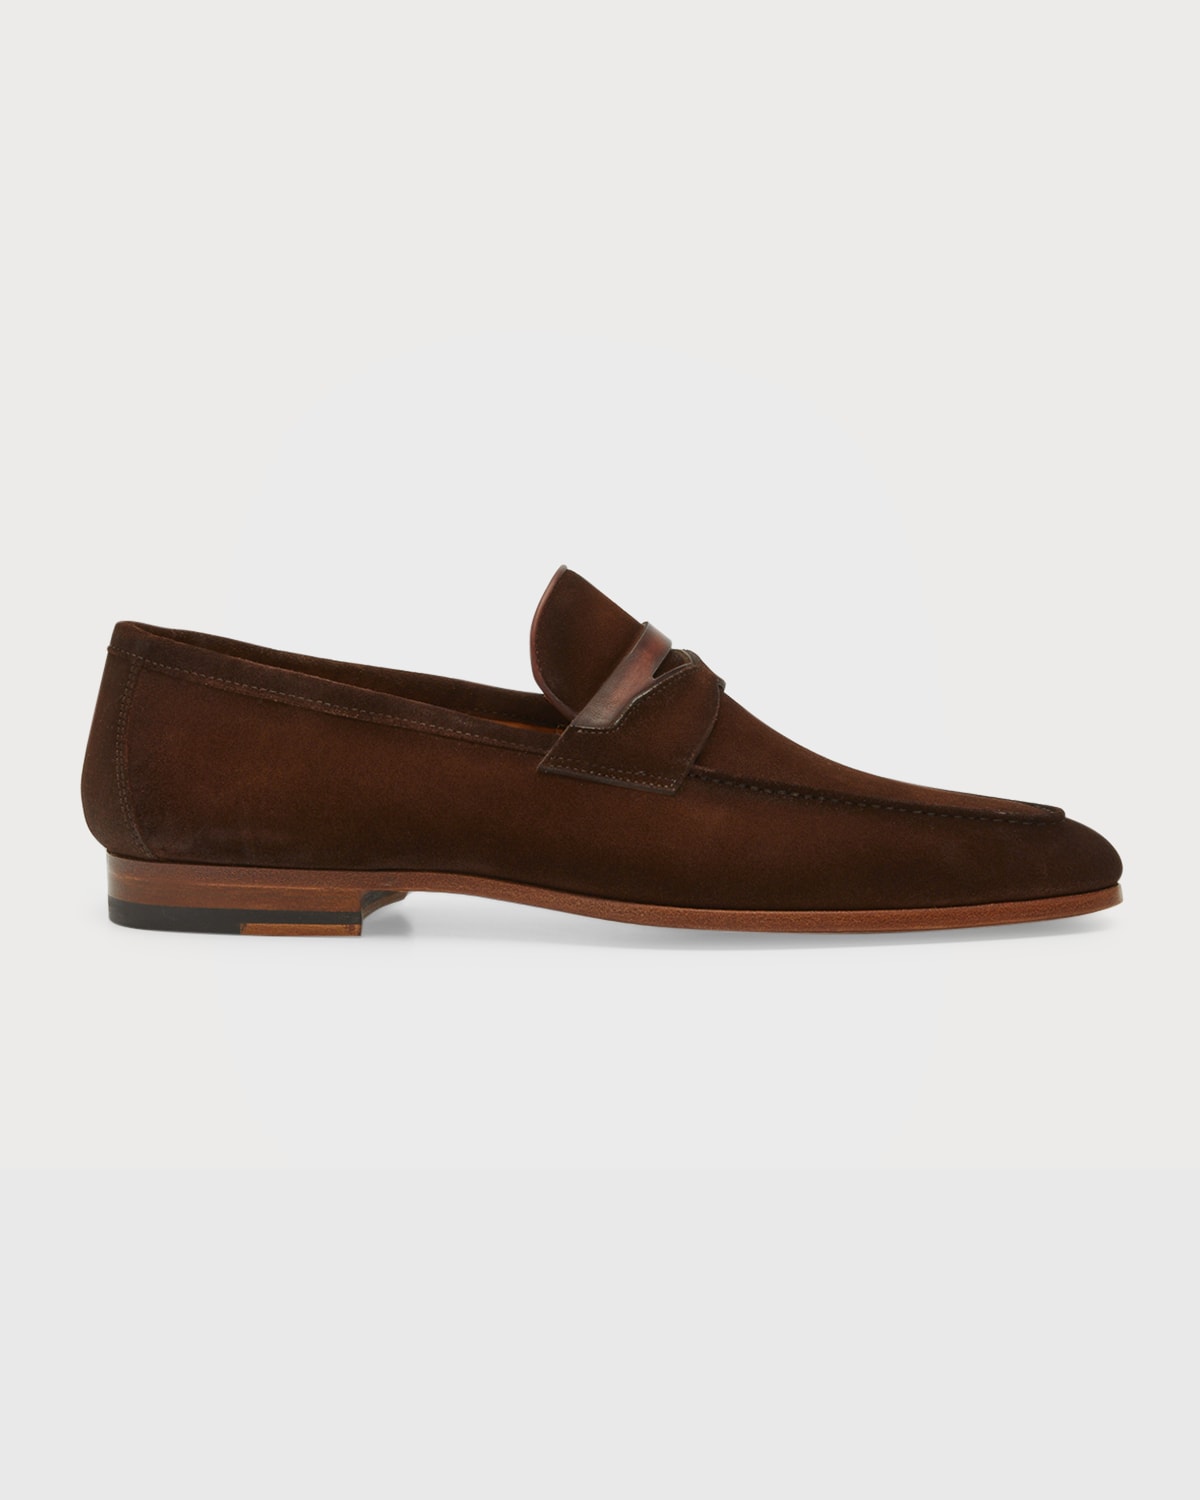 Magnanni Men's Matlin III Leather Penny Loafers | Neiman Marcus